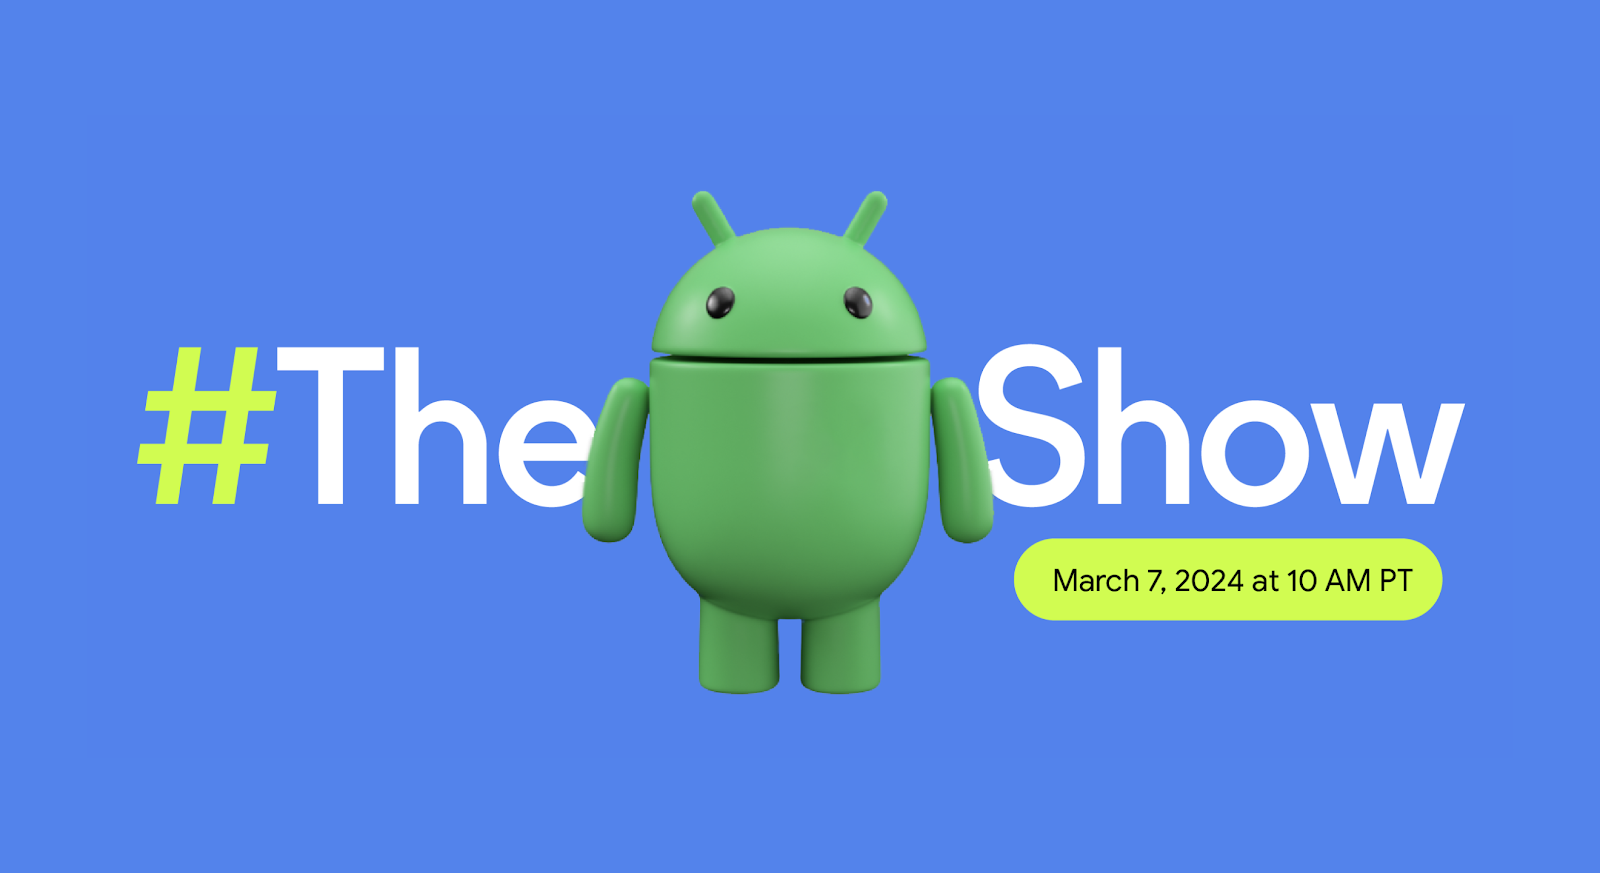 New goodies from Android, Wearables at Mobile World Congress + tune in to a new episode of #TheAndroidShow next week!